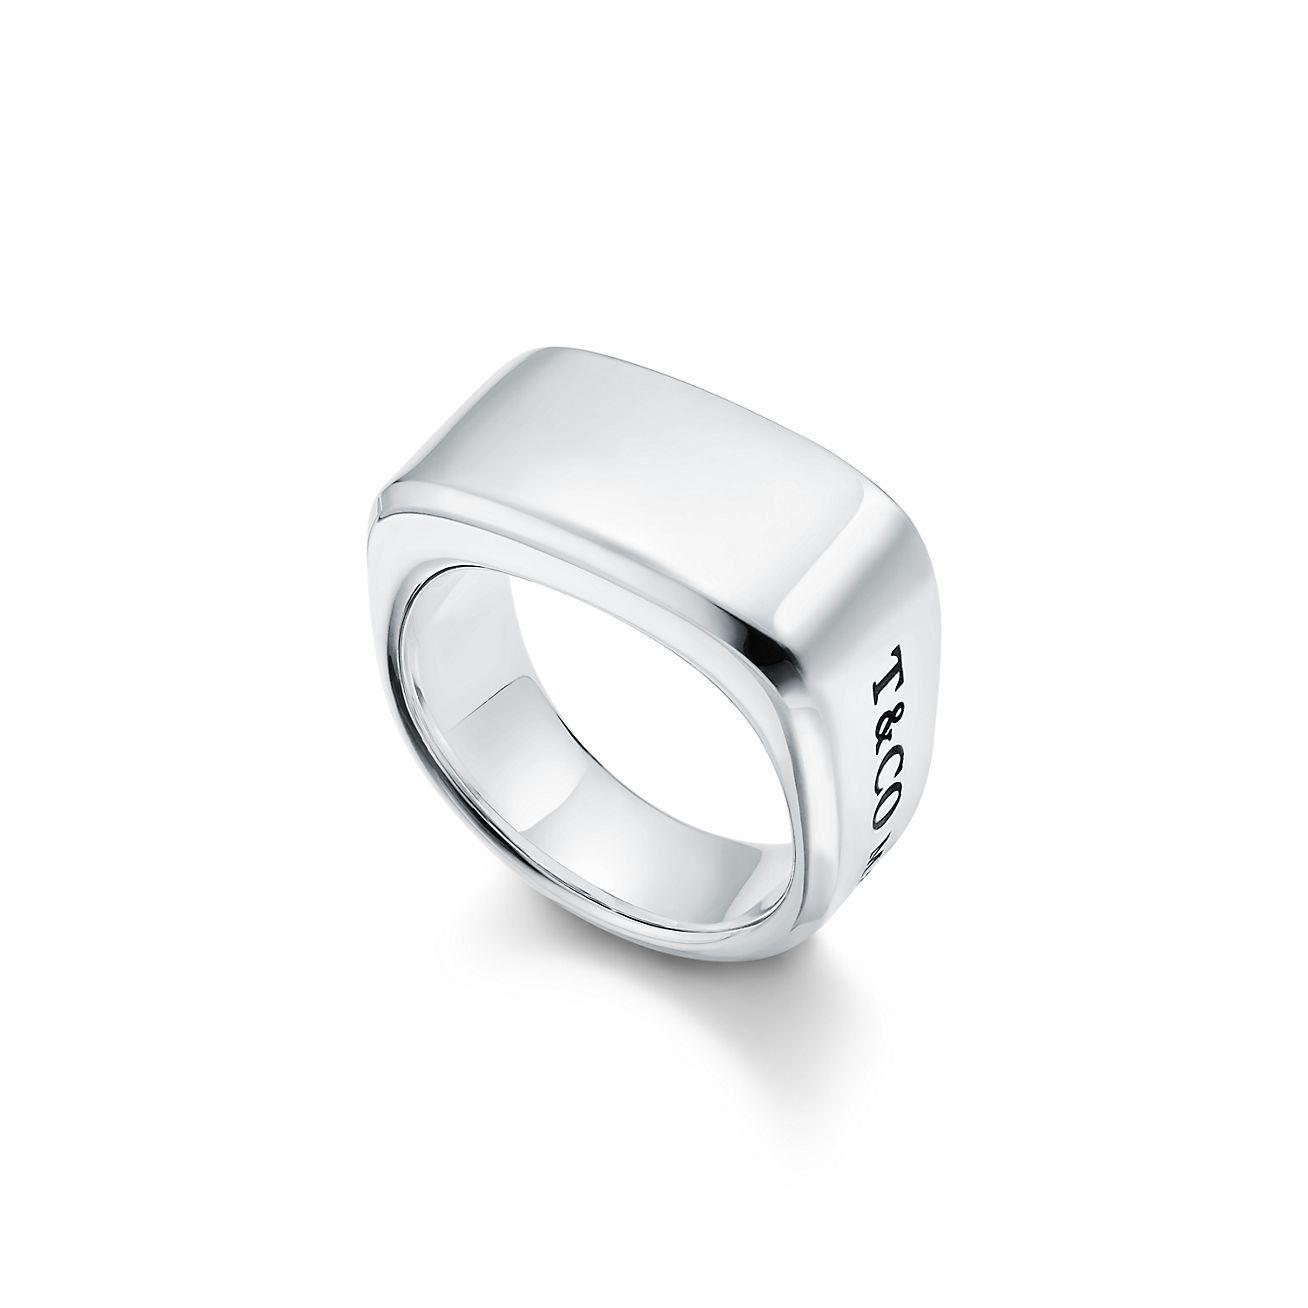 Tiffany 1837® Makers signet ring in 